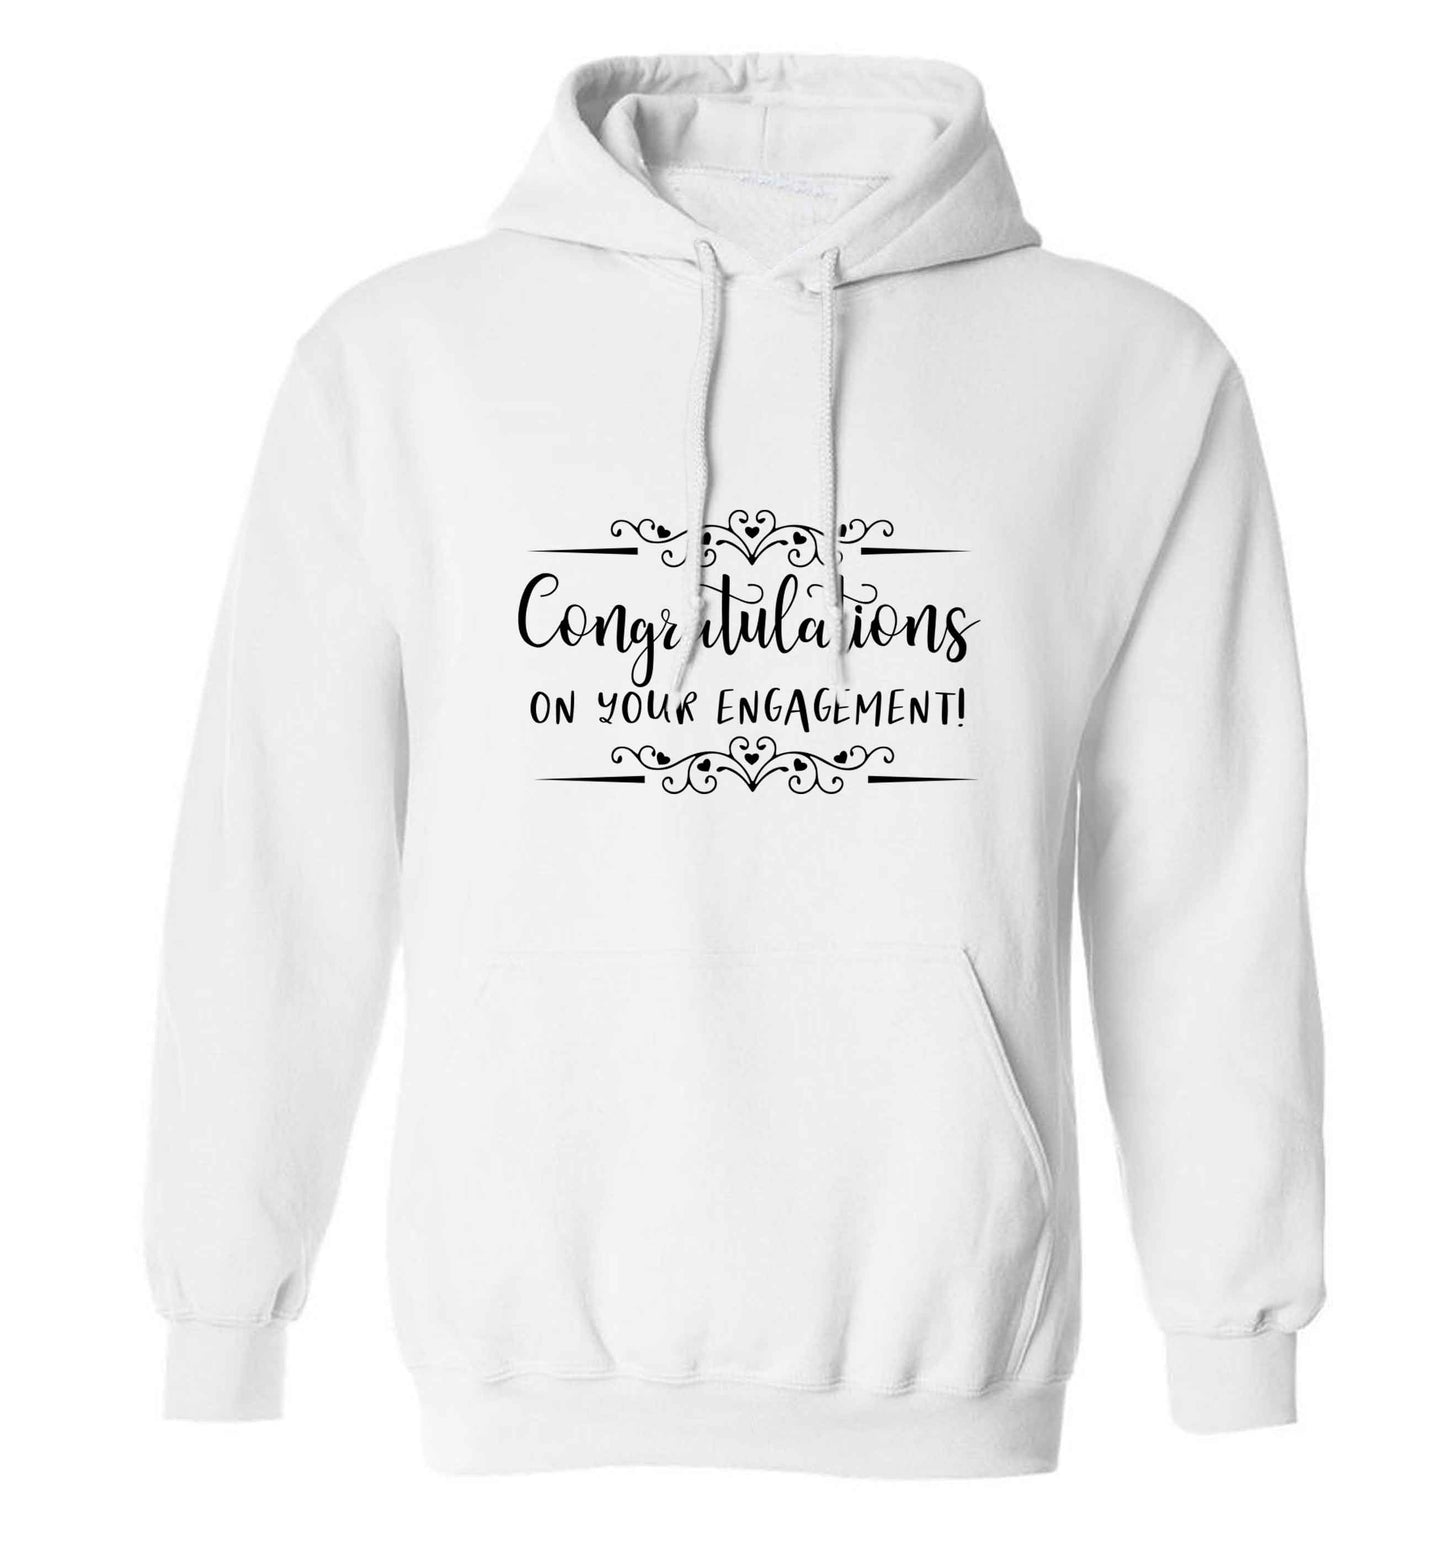 Congratulations on your engagement adults unisex white hoodie 2XL